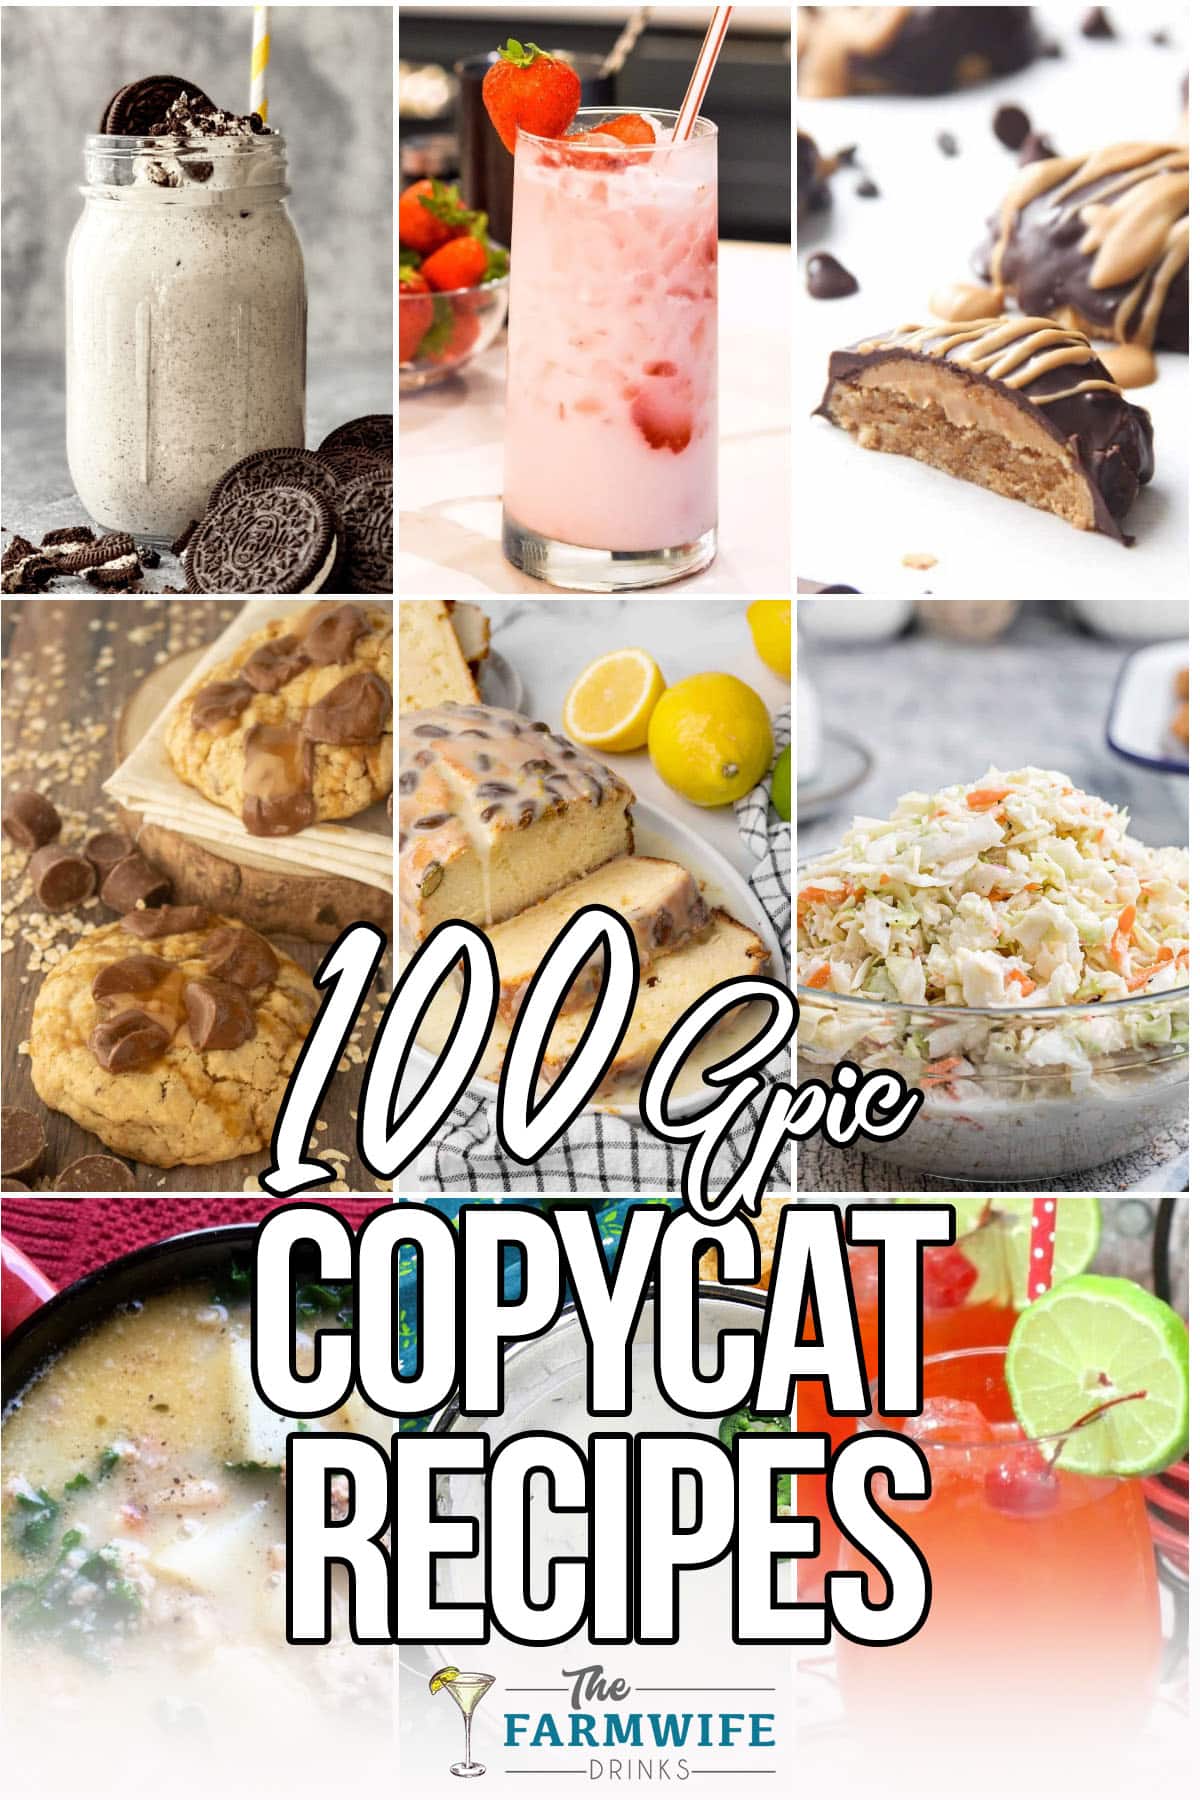 photo collage of easy restaurant dupe recipes with text which reads 100 epic copycat recipes